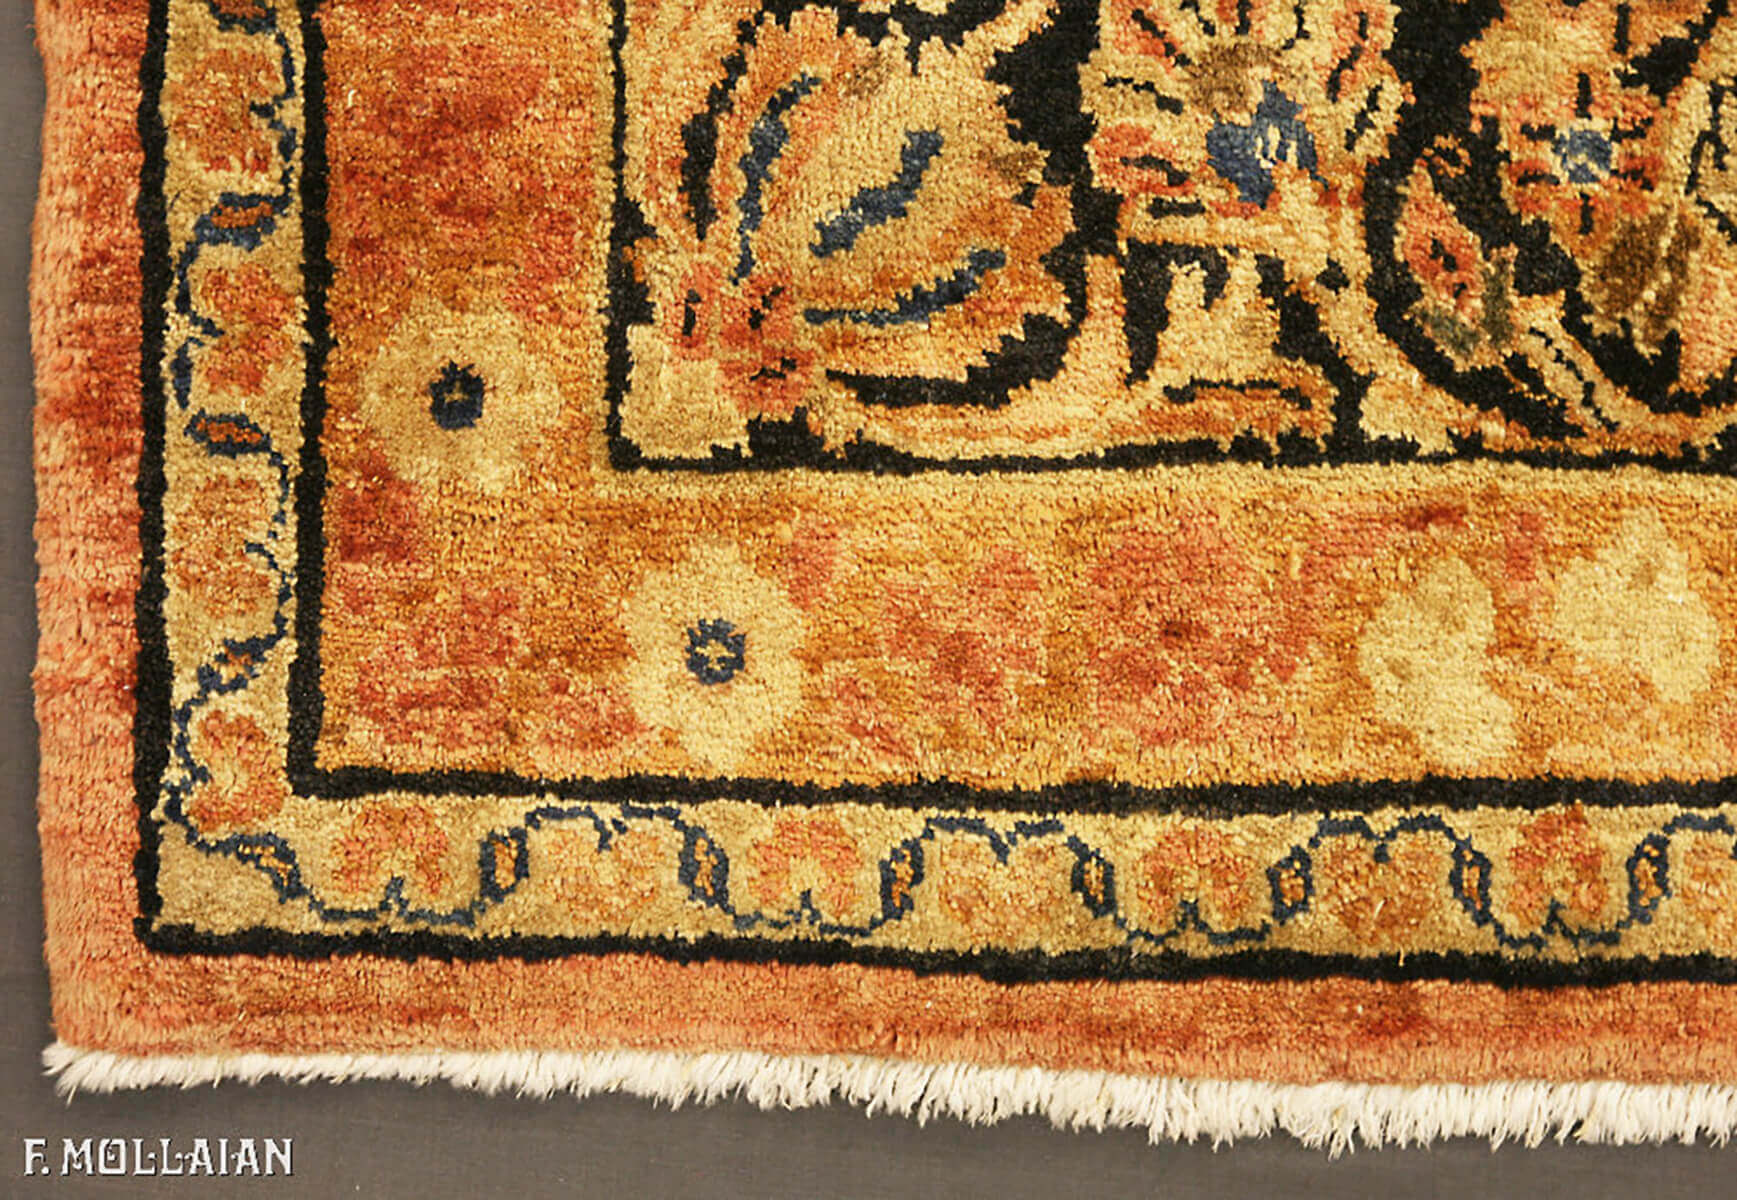 Salmon Color Field Floral Antique Persian Saruk Rug n°:95583952